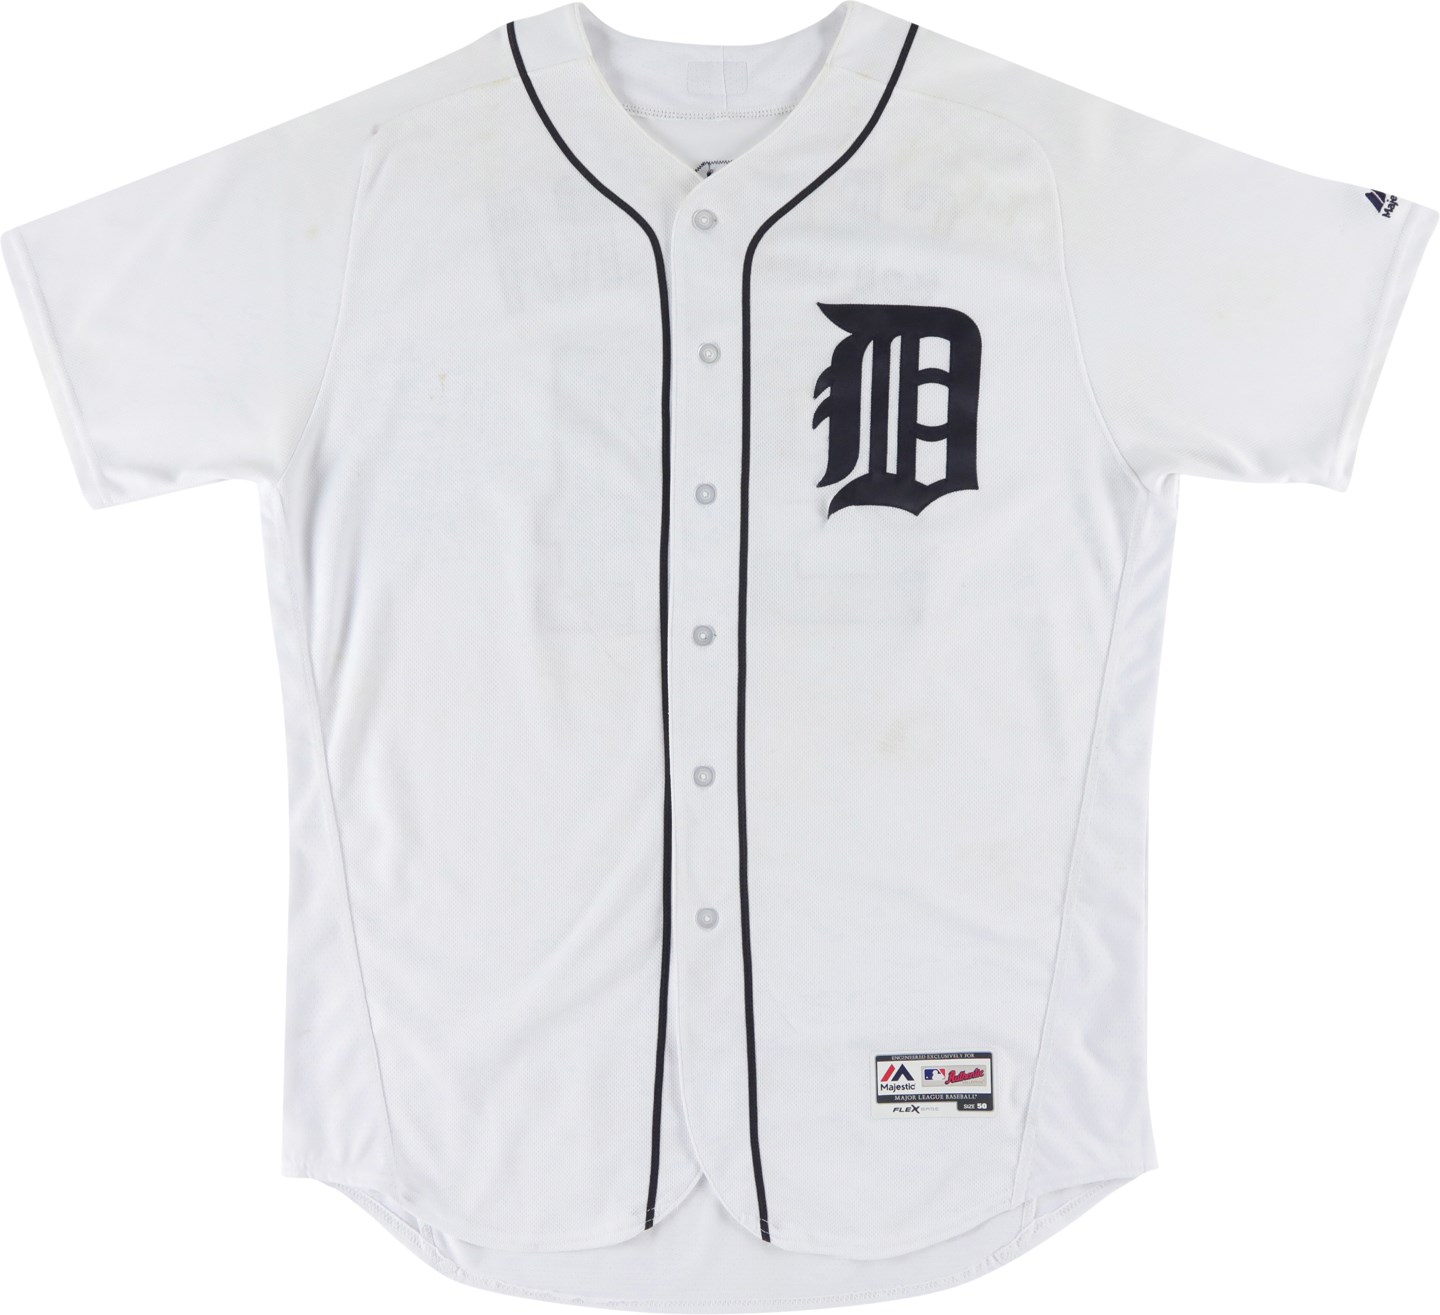 - 2016 Miguel Cabrera HR #424, 425, 426 Detroit Tigers Game Worn Jersey - HR #426 Ties Billy Williams on All-Time List (MLB & Sports Investors Photo-Match LOA)